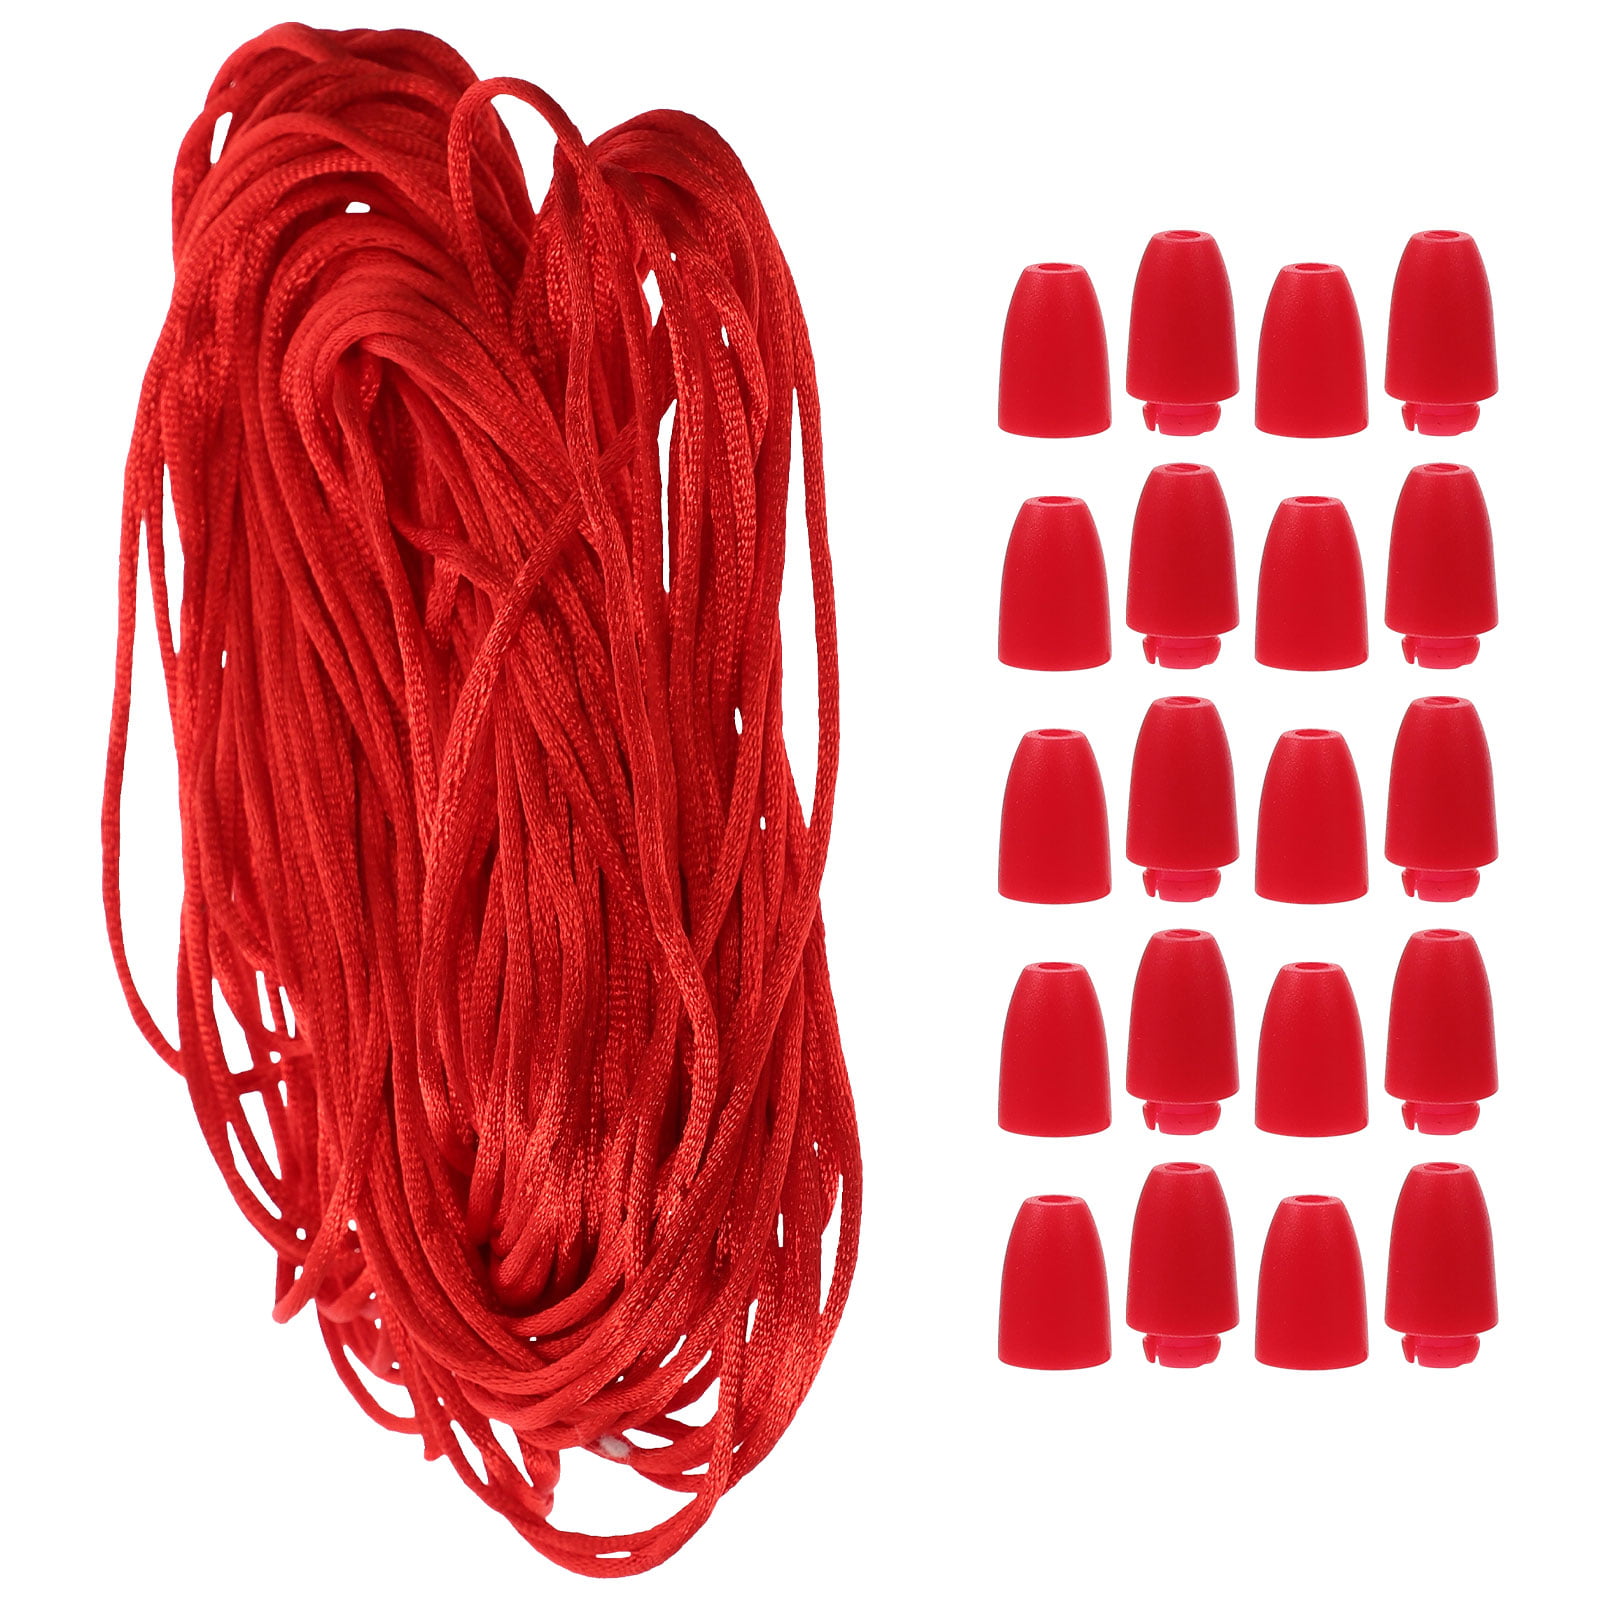 0.75 inch Floating Polypropylene Swimming Pool Rope - Red-White